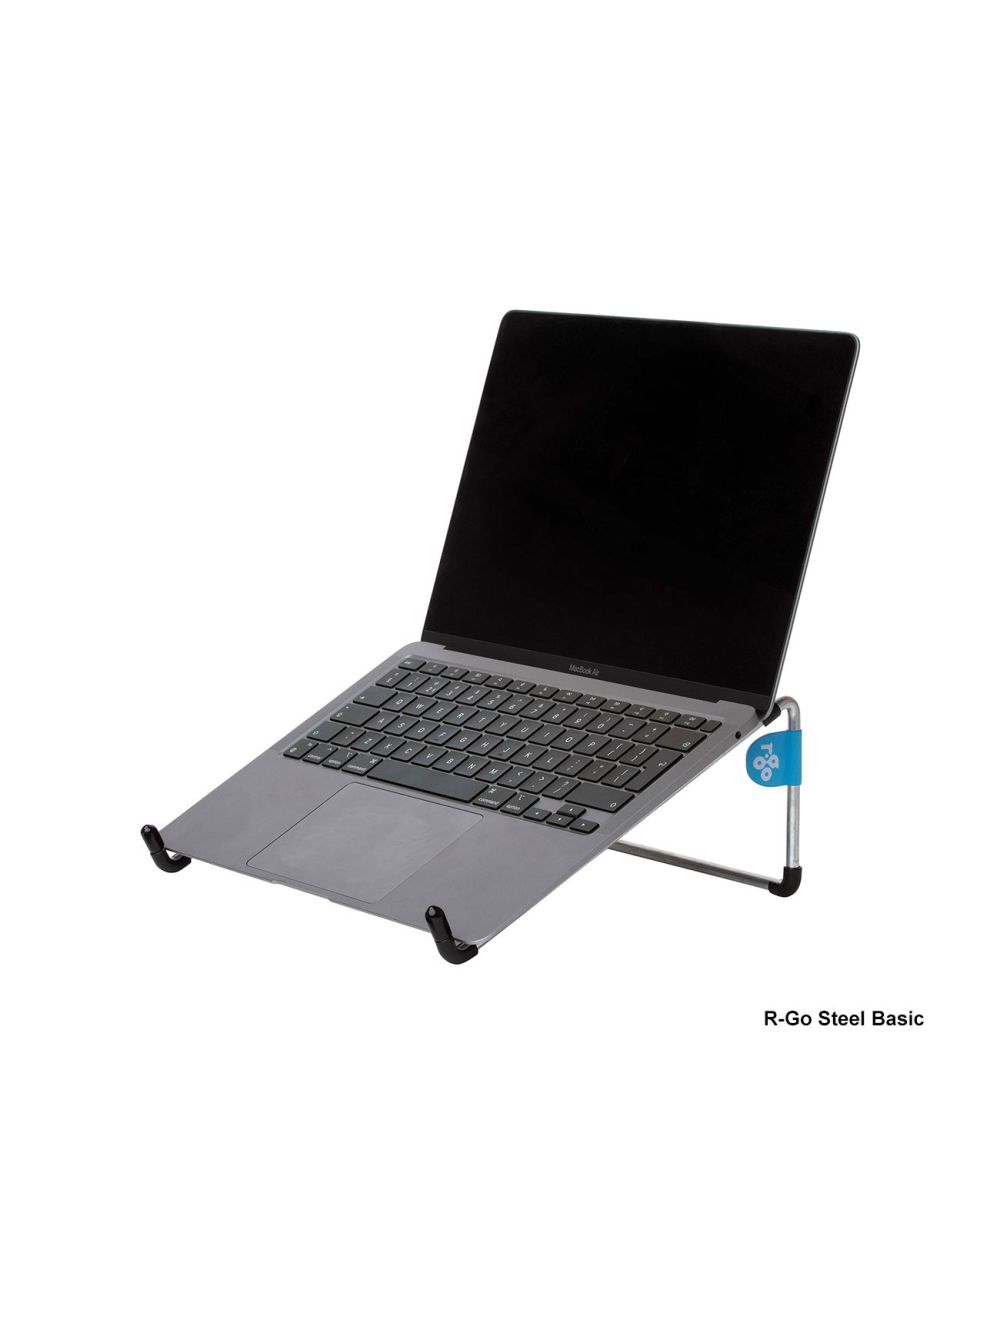 Laptop stand R-Go Steel Basic